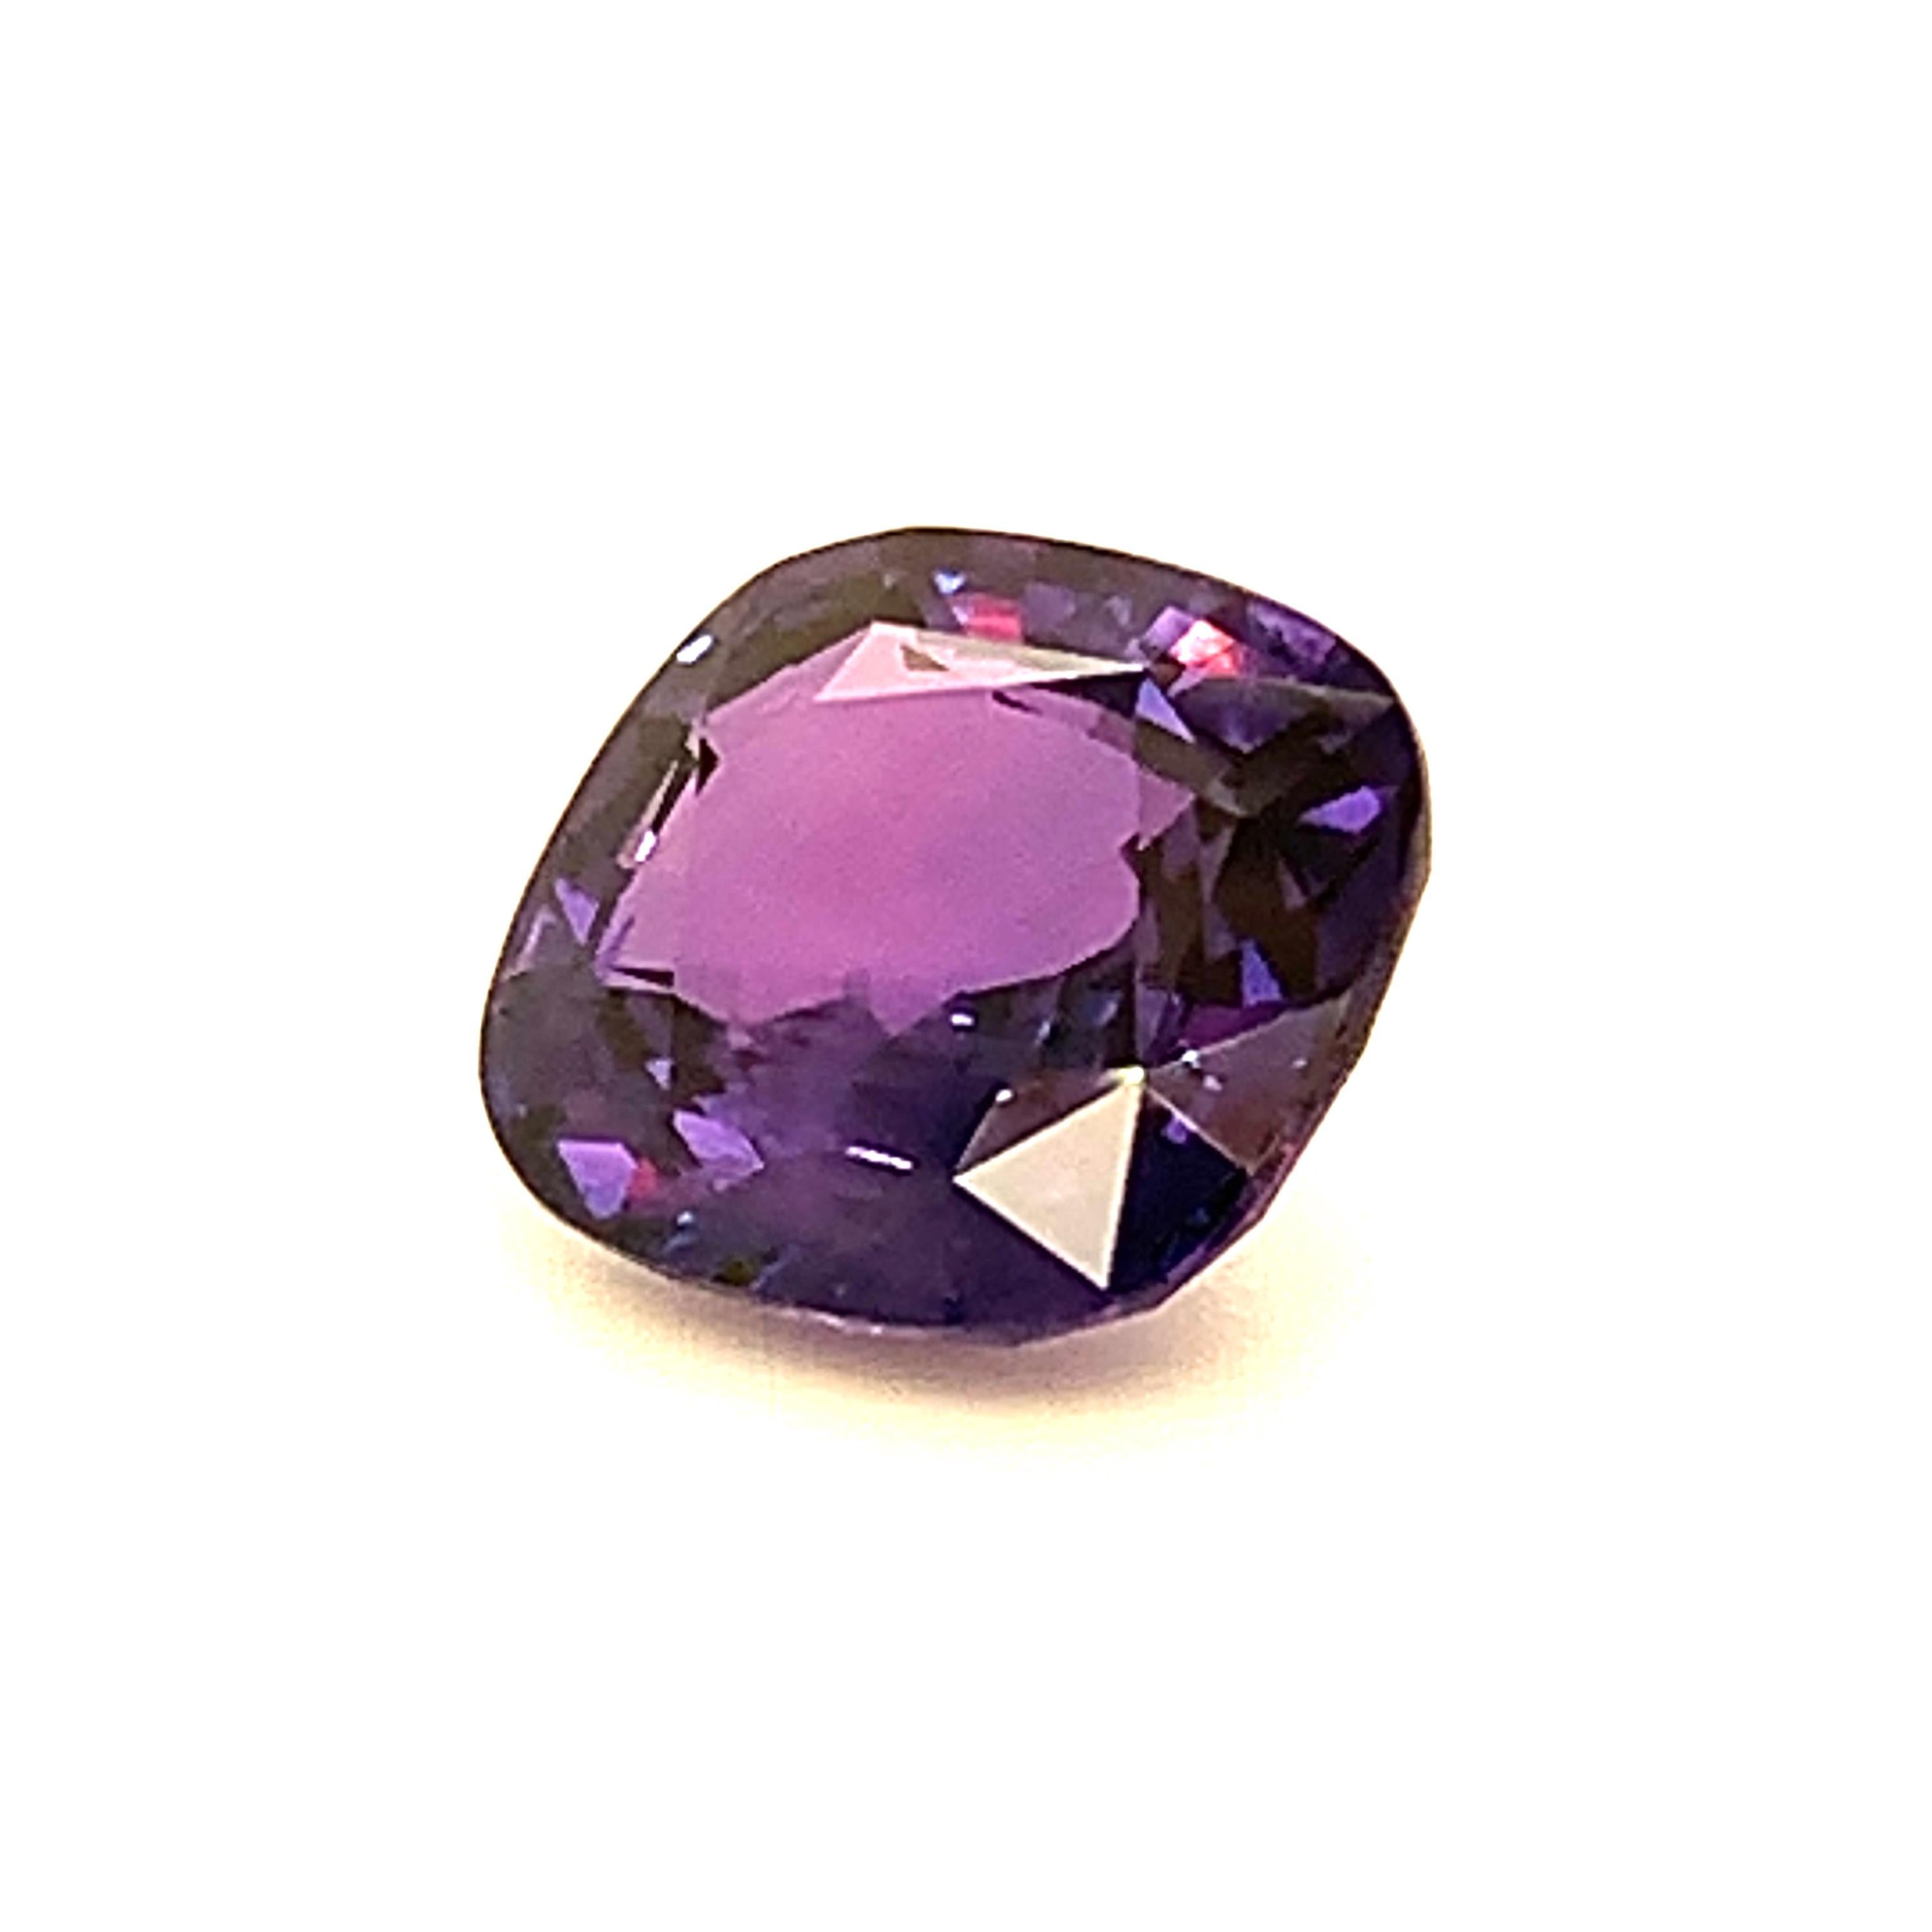 6.76 Carat Color Change Sapphire Cushion, Unset Loose Gemstone, GIA Certified 3